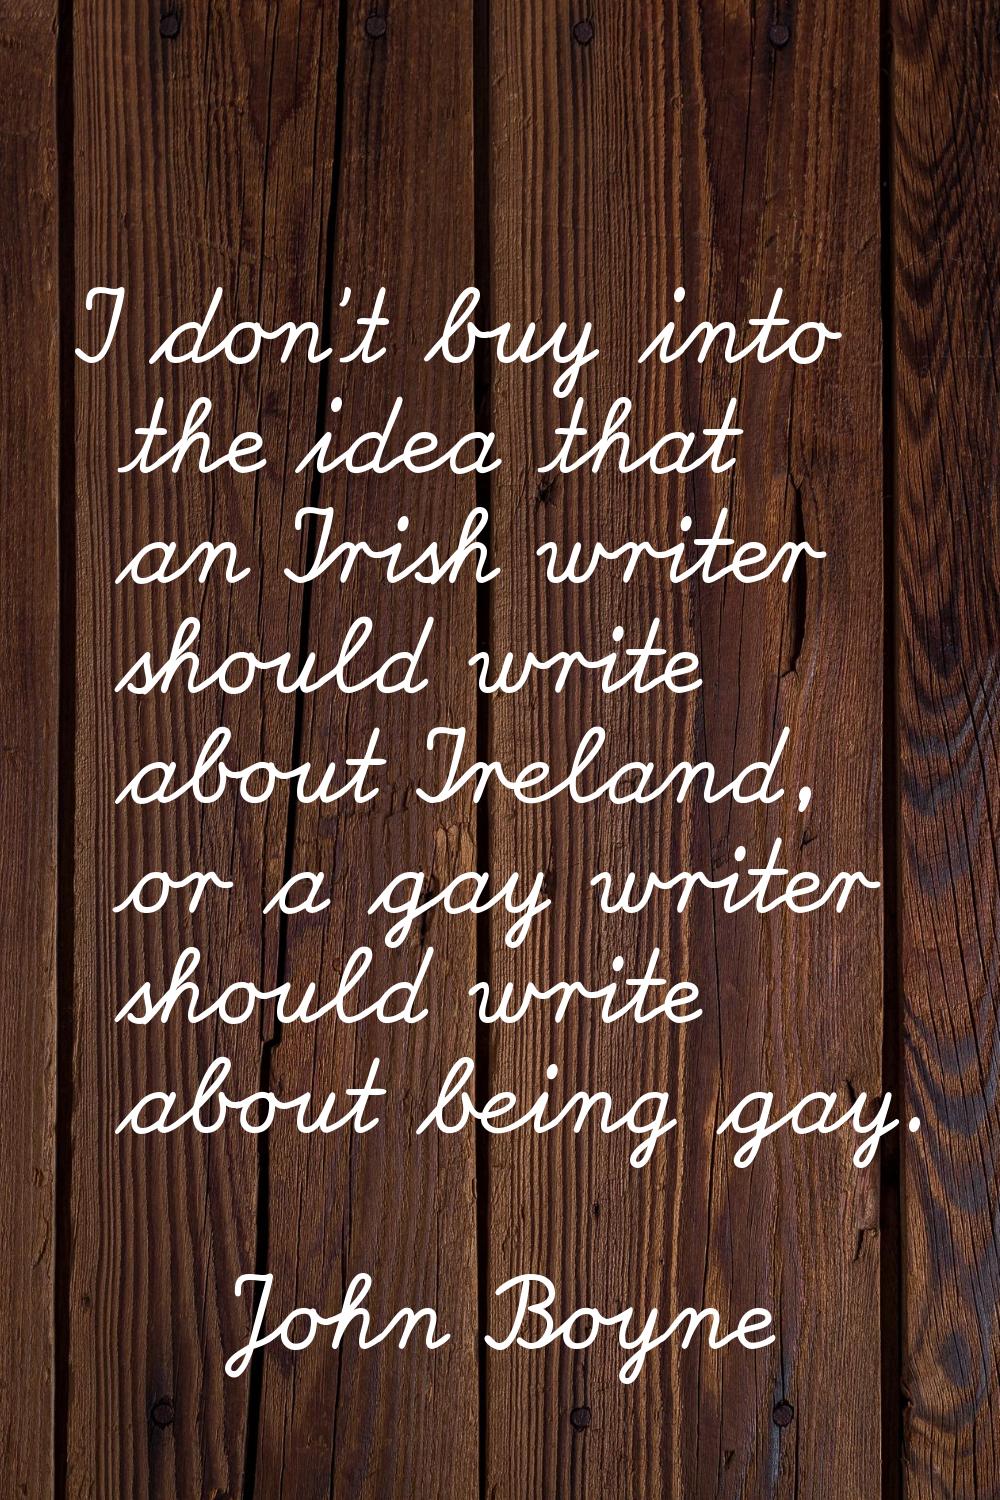 I don't buy into the idea that an Irish writer should write about Ireland, or a gay writer should w